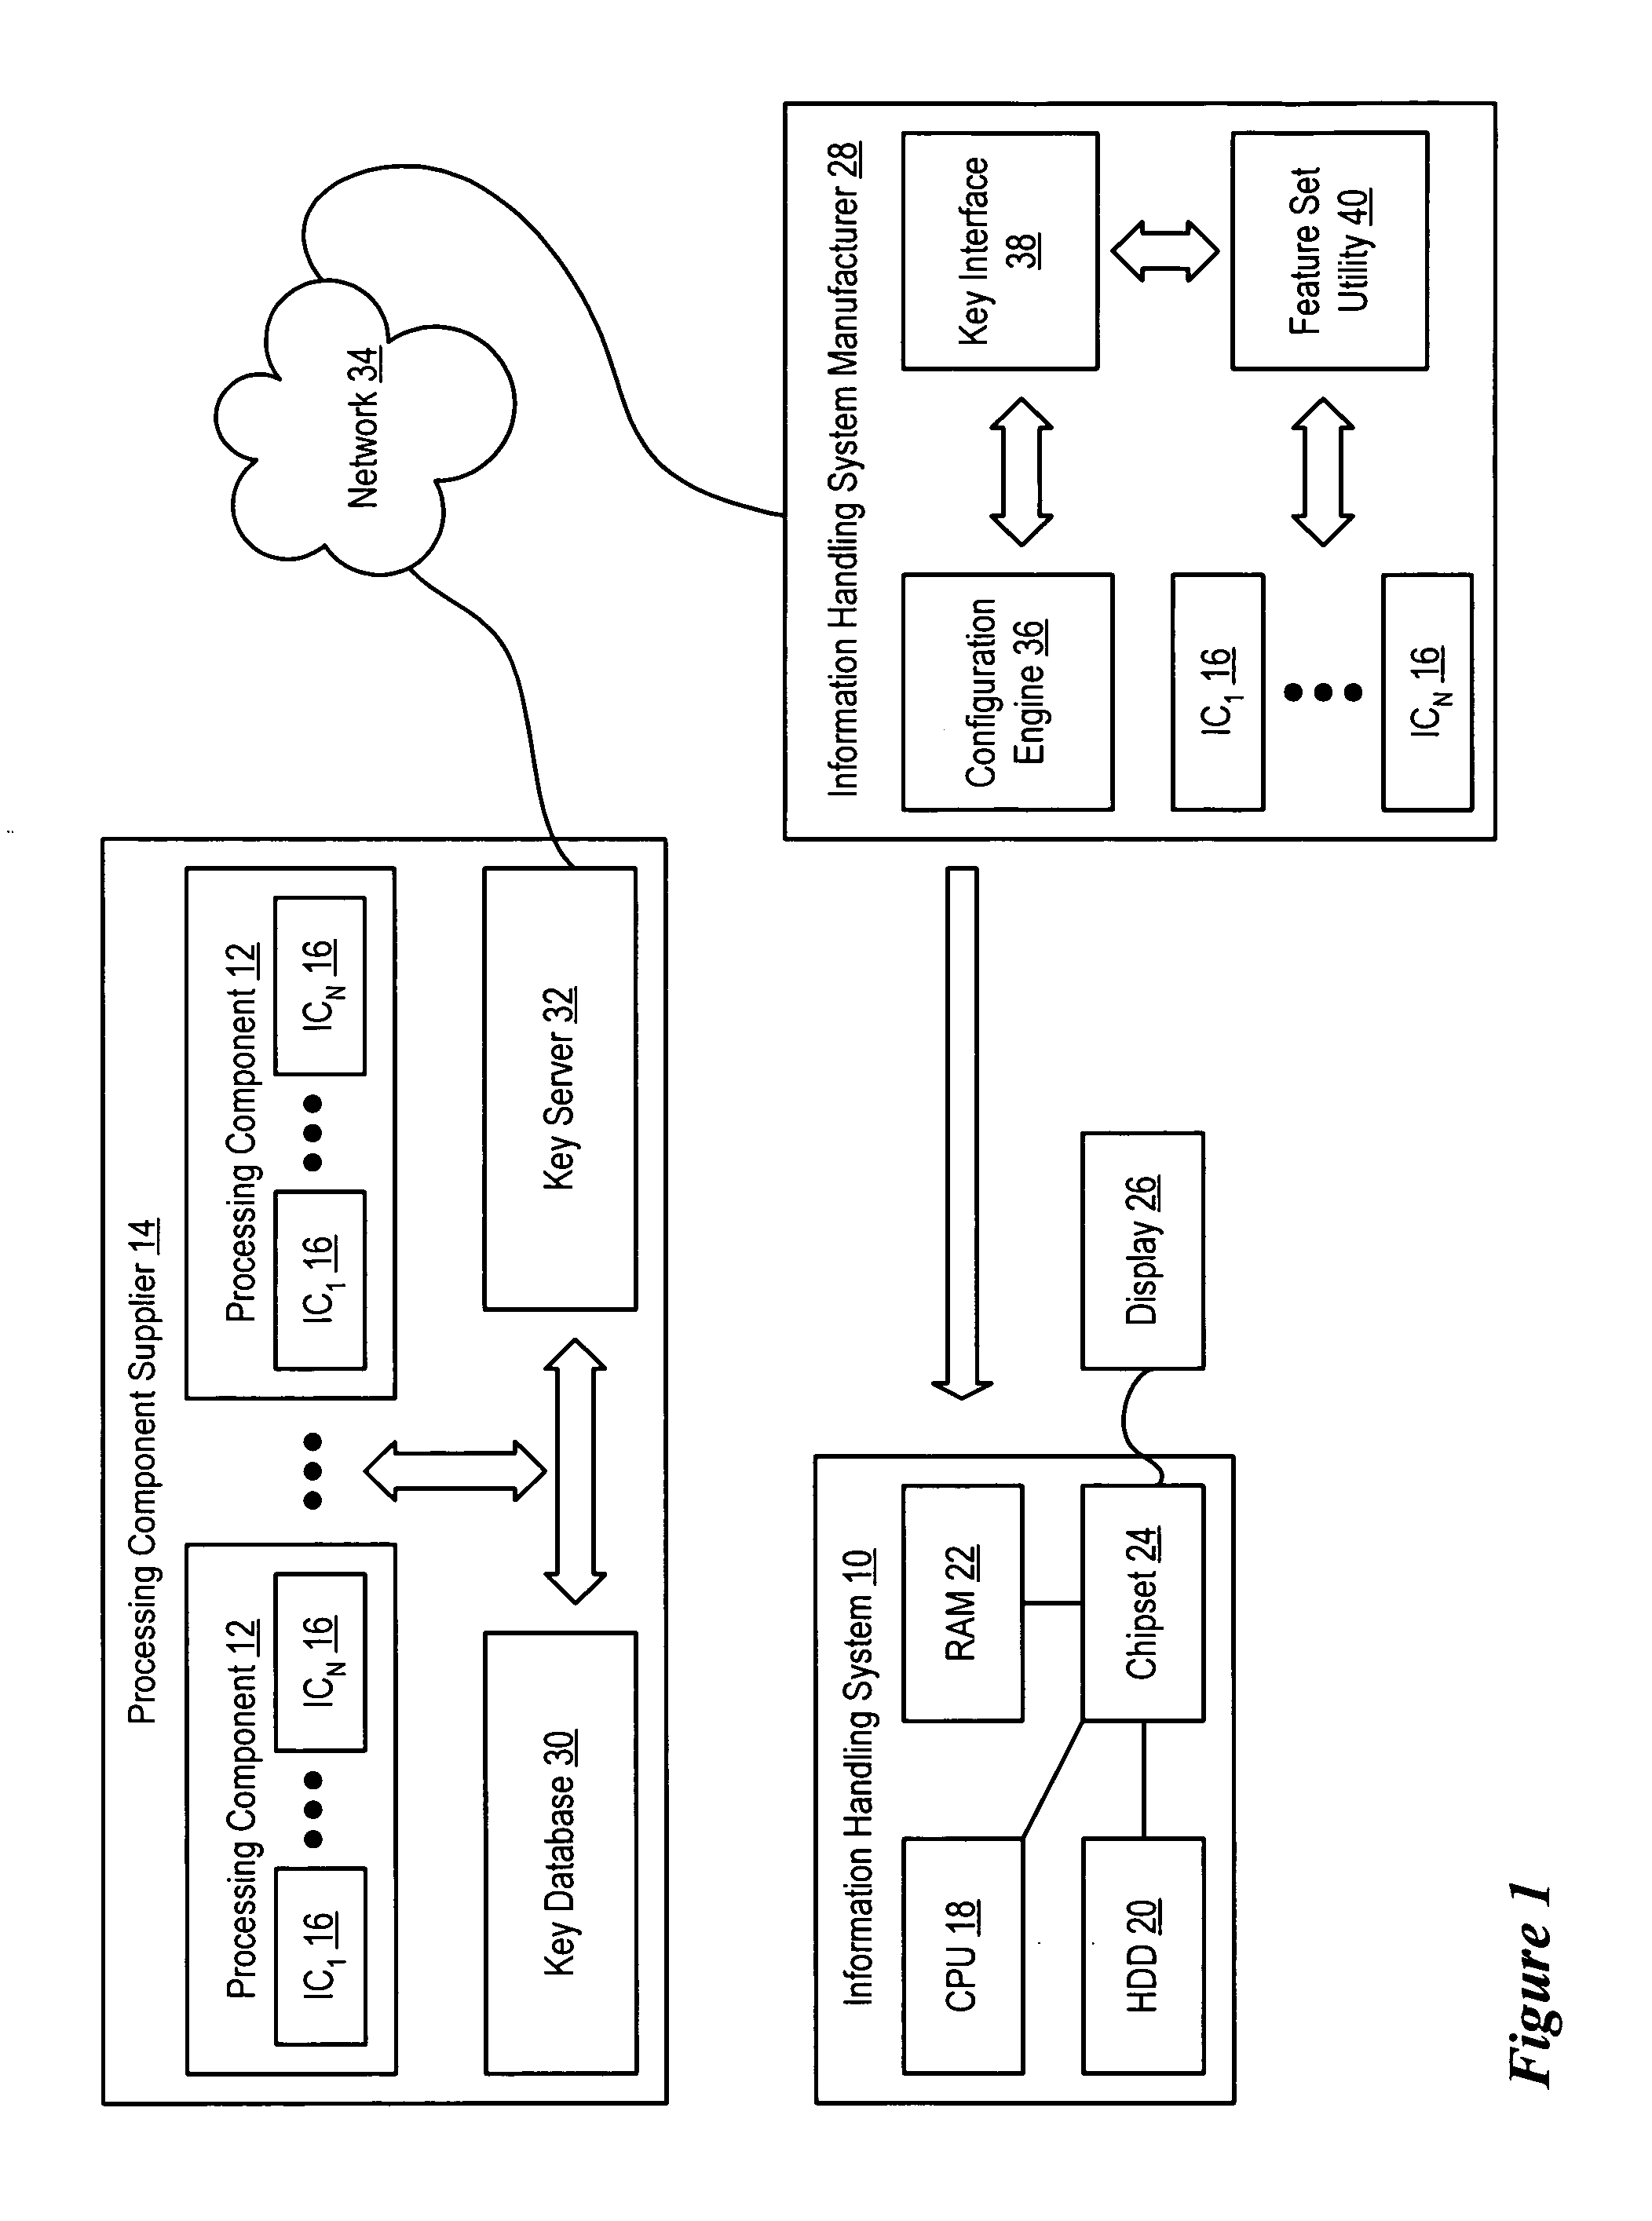 System and method for configuring information handling system integrated circuits